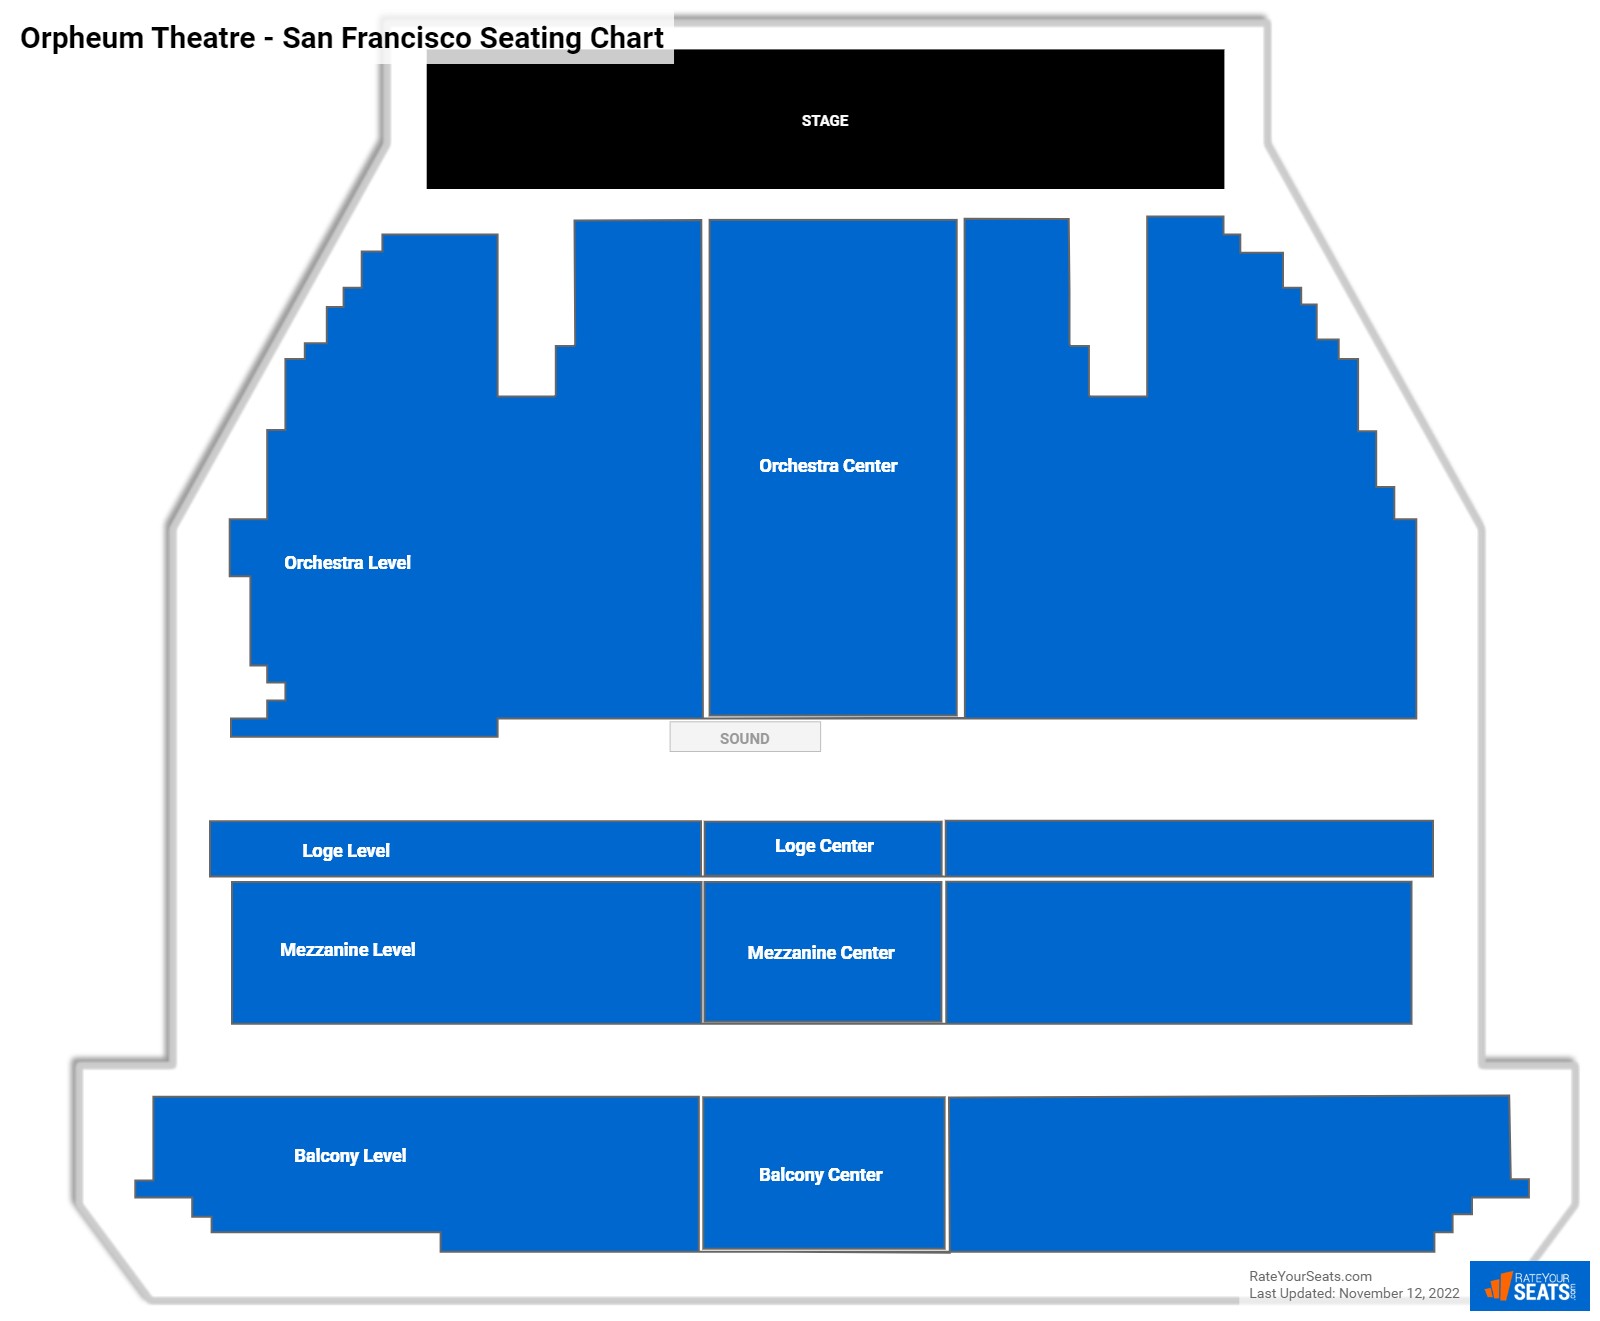 Orpheum Theatre - San Francisco Theater Seating Chart